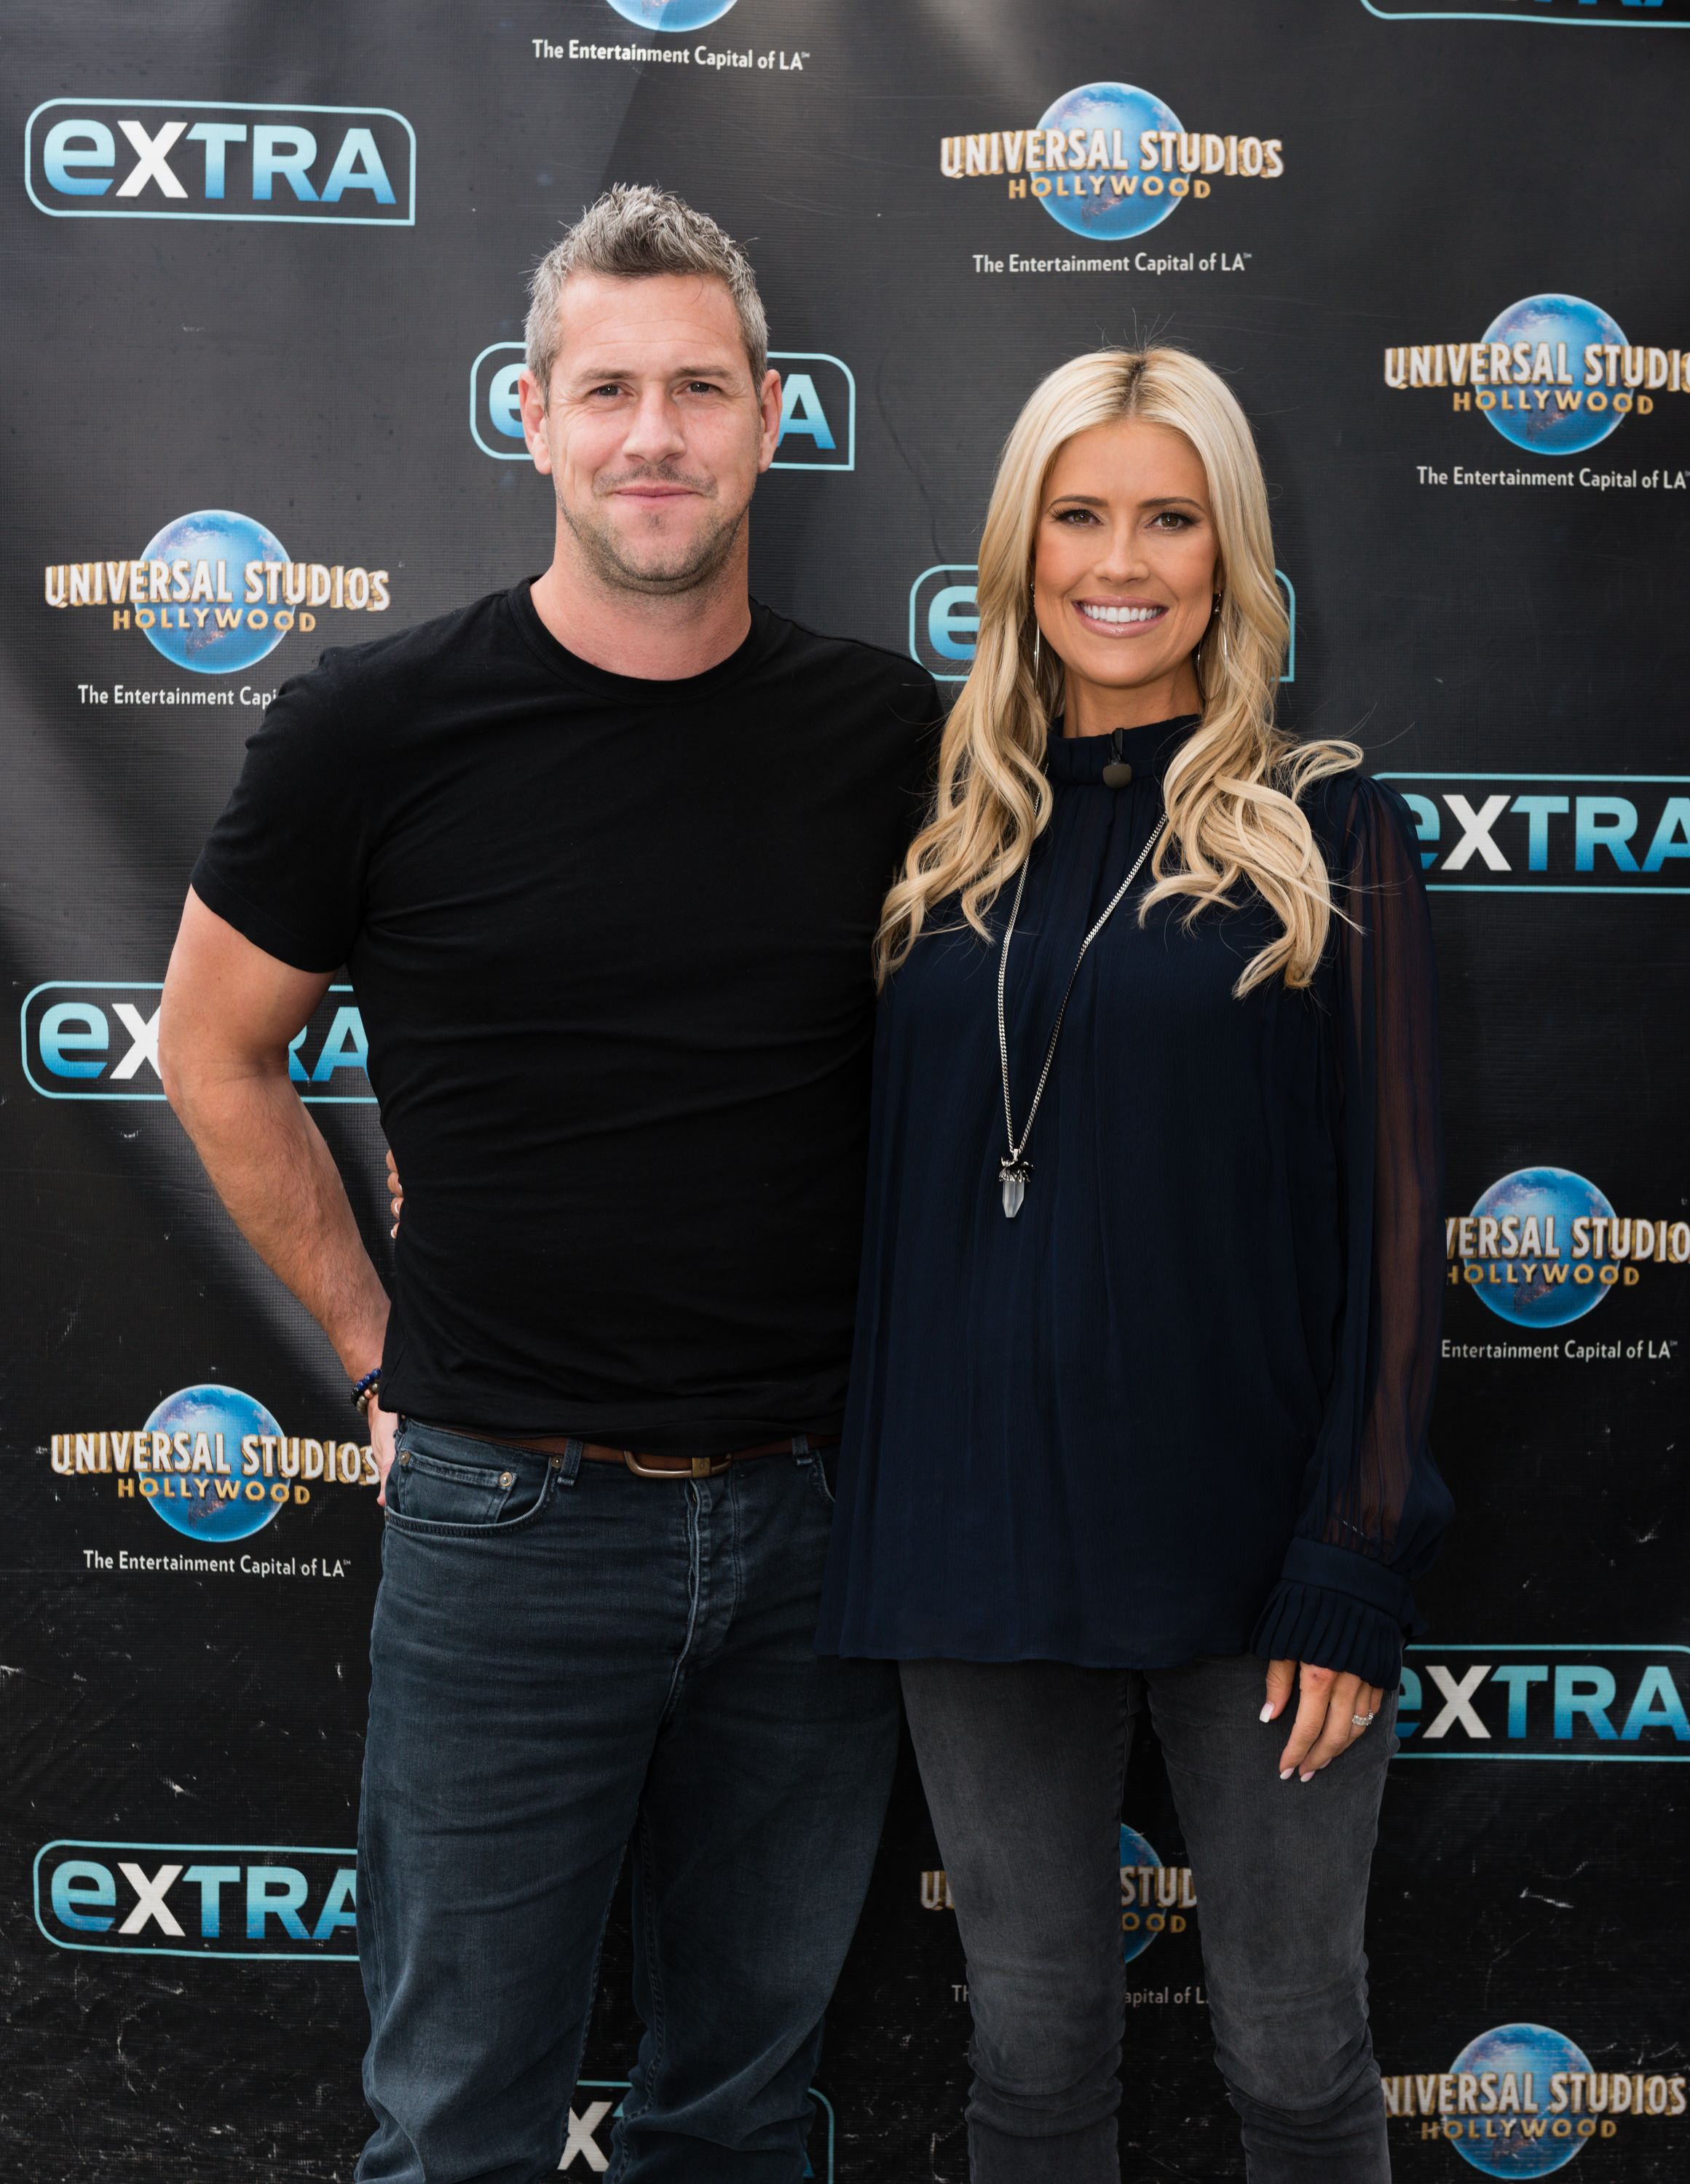 Ant and Christina Anstead visit "Extra" at Universal Studios Hollywood on May 22, 2019, in Universal City, California | Photo: Noel Vasquez/Getty Images